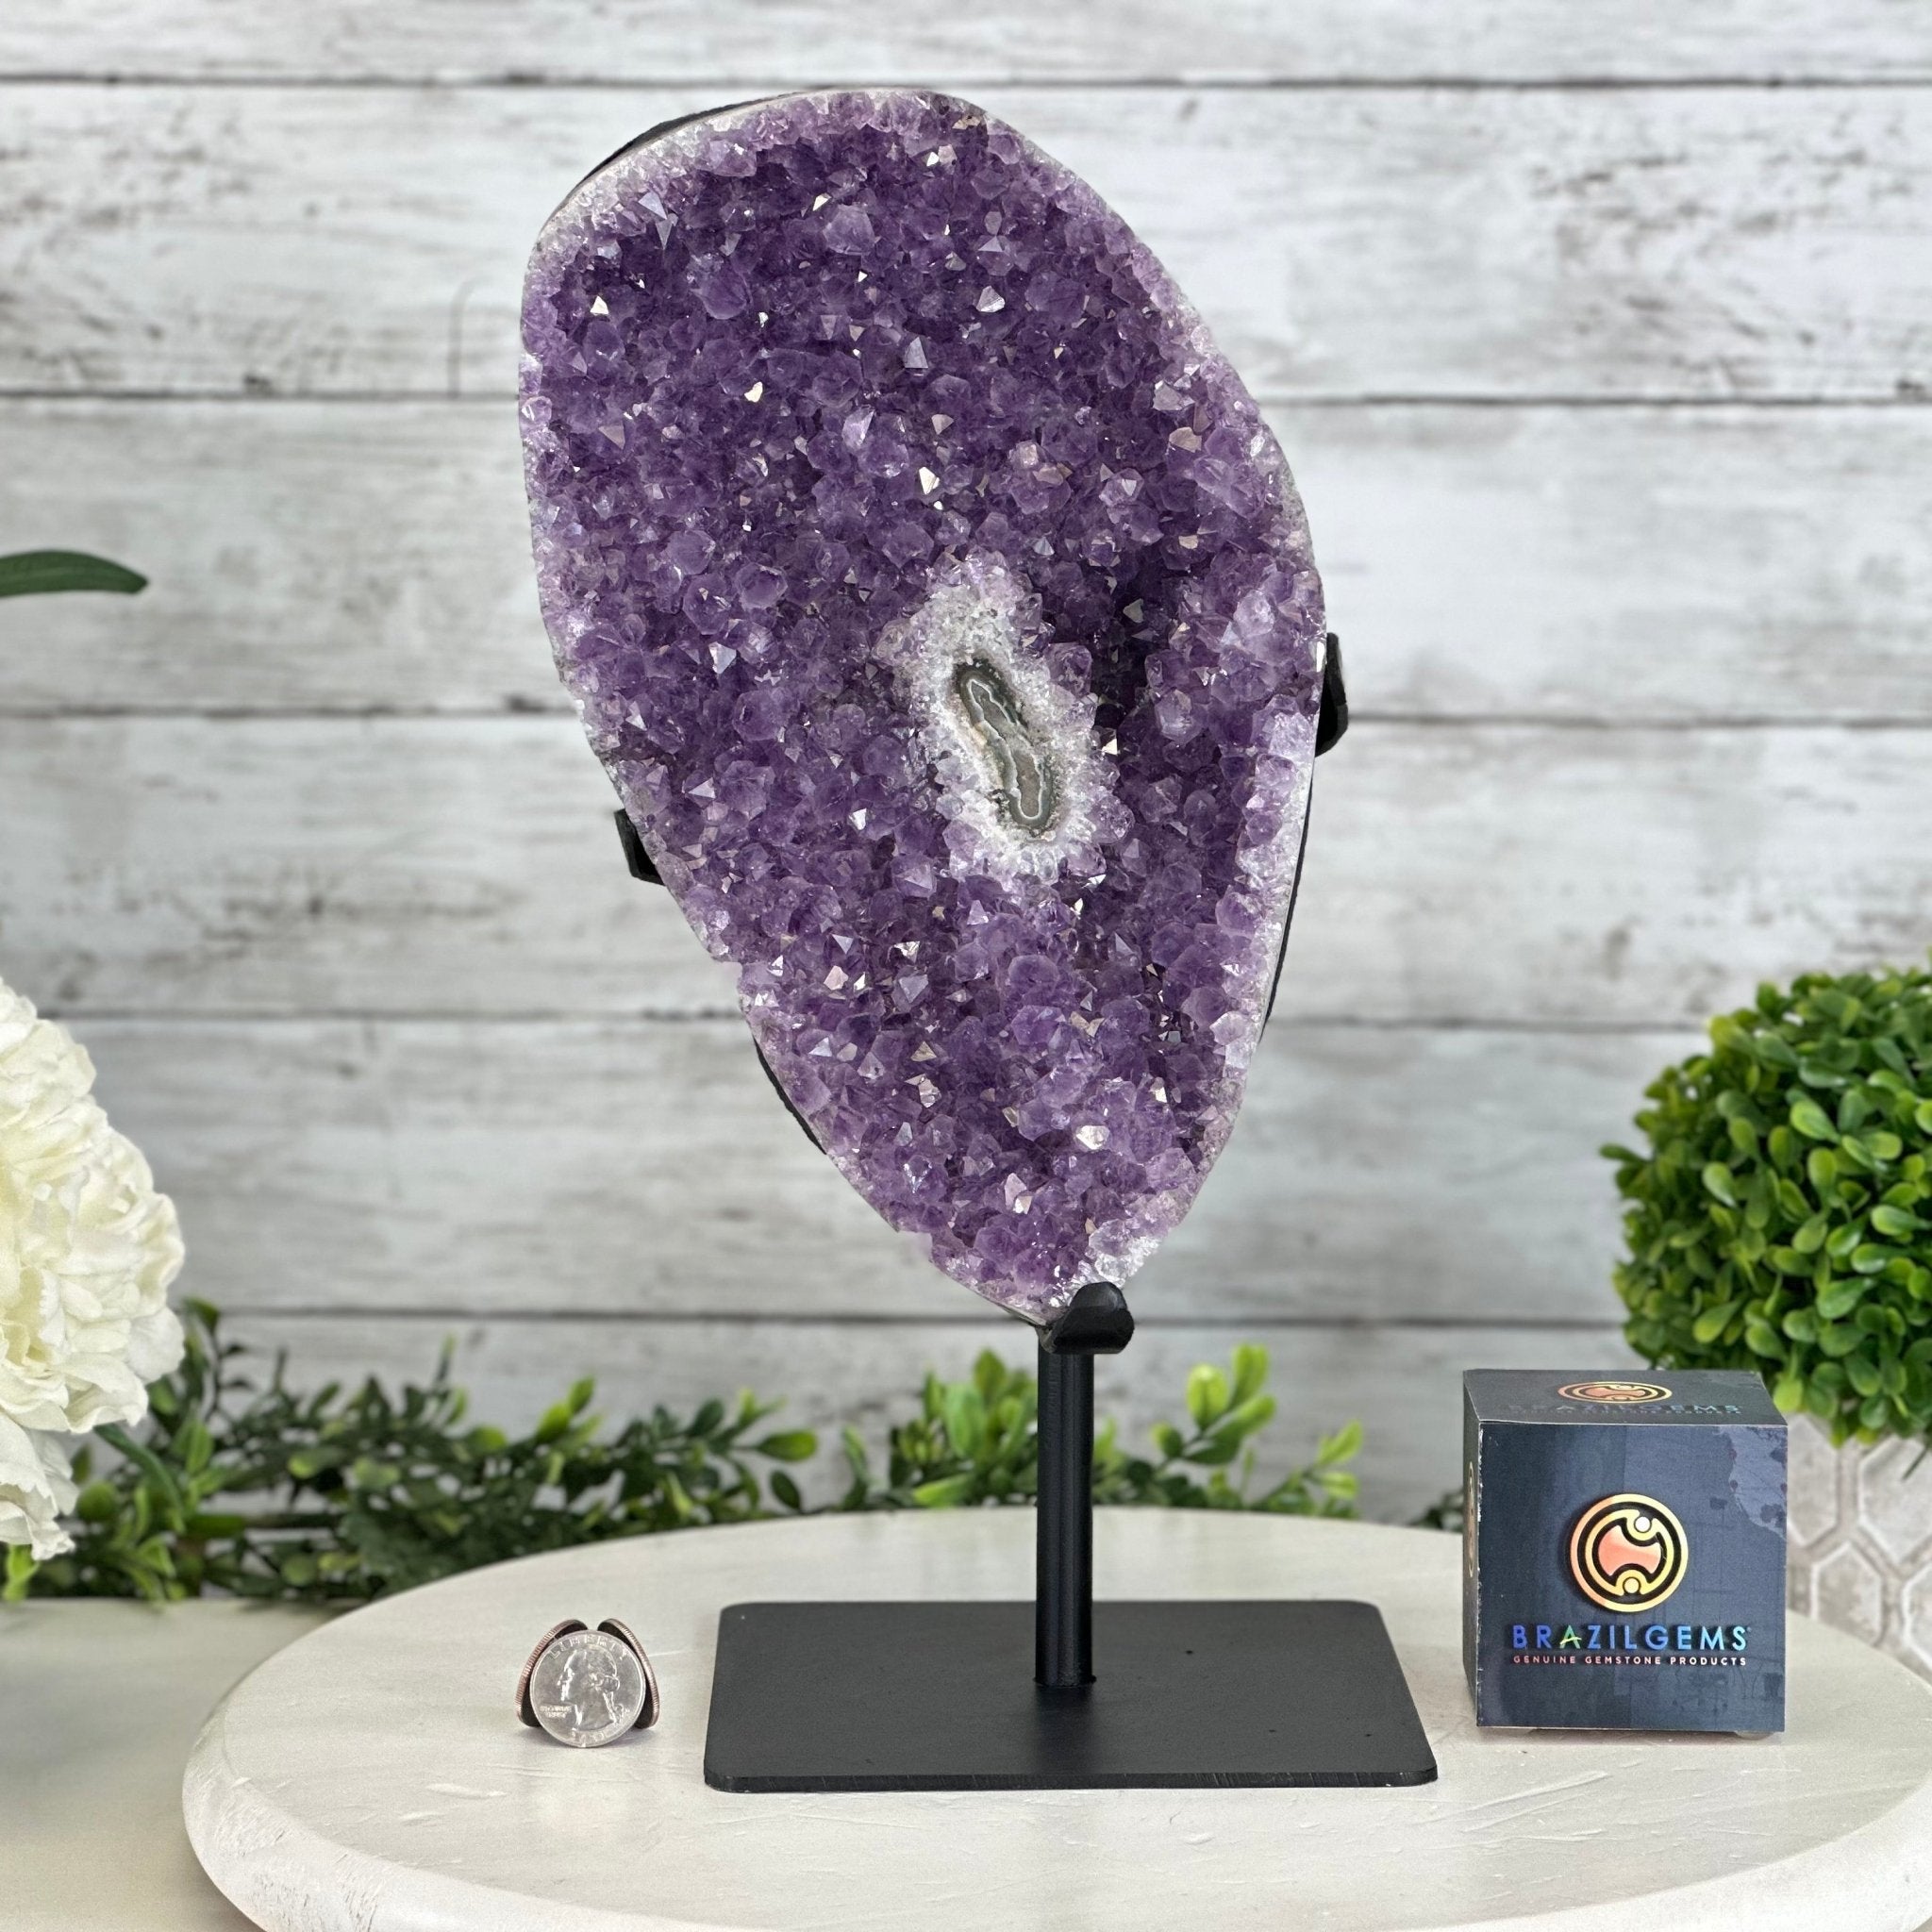 Quality Amethyst Cluster on a Metal Base, 13.9 lbs & 13.6" Tall #5491 - 0052 - Brazil GemsBrazil GemsQuality Amethyst Cluster on a Metal Base, 13.9 lbs & 13.6" Tall #5491 - 0052Clusters on Fixed Bases5491 - 0052